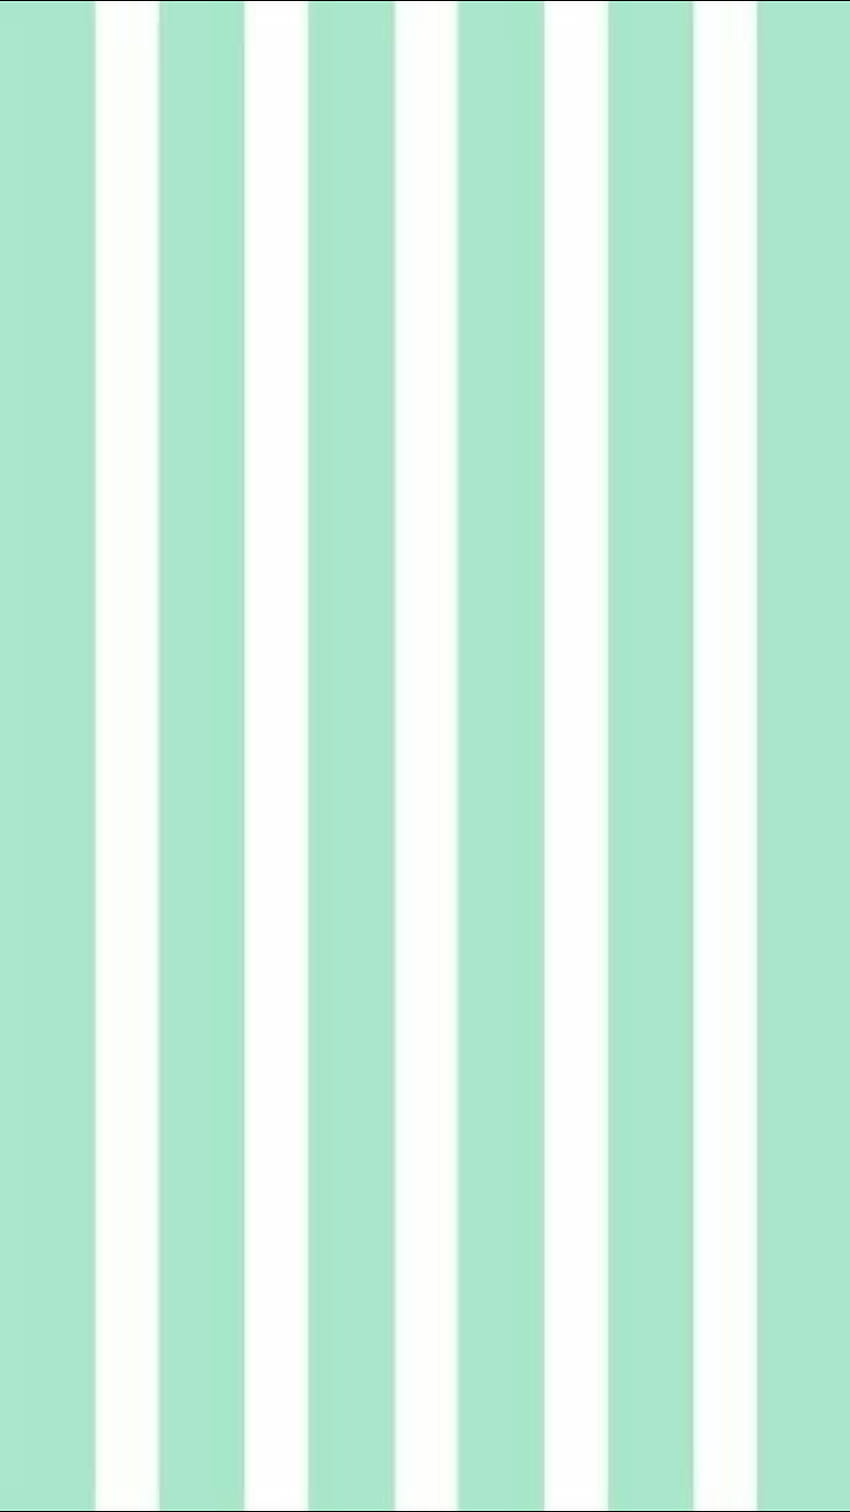 Mint Green Aesthetic Backgrounds, mint aesthetic HD phone wallpaper ...